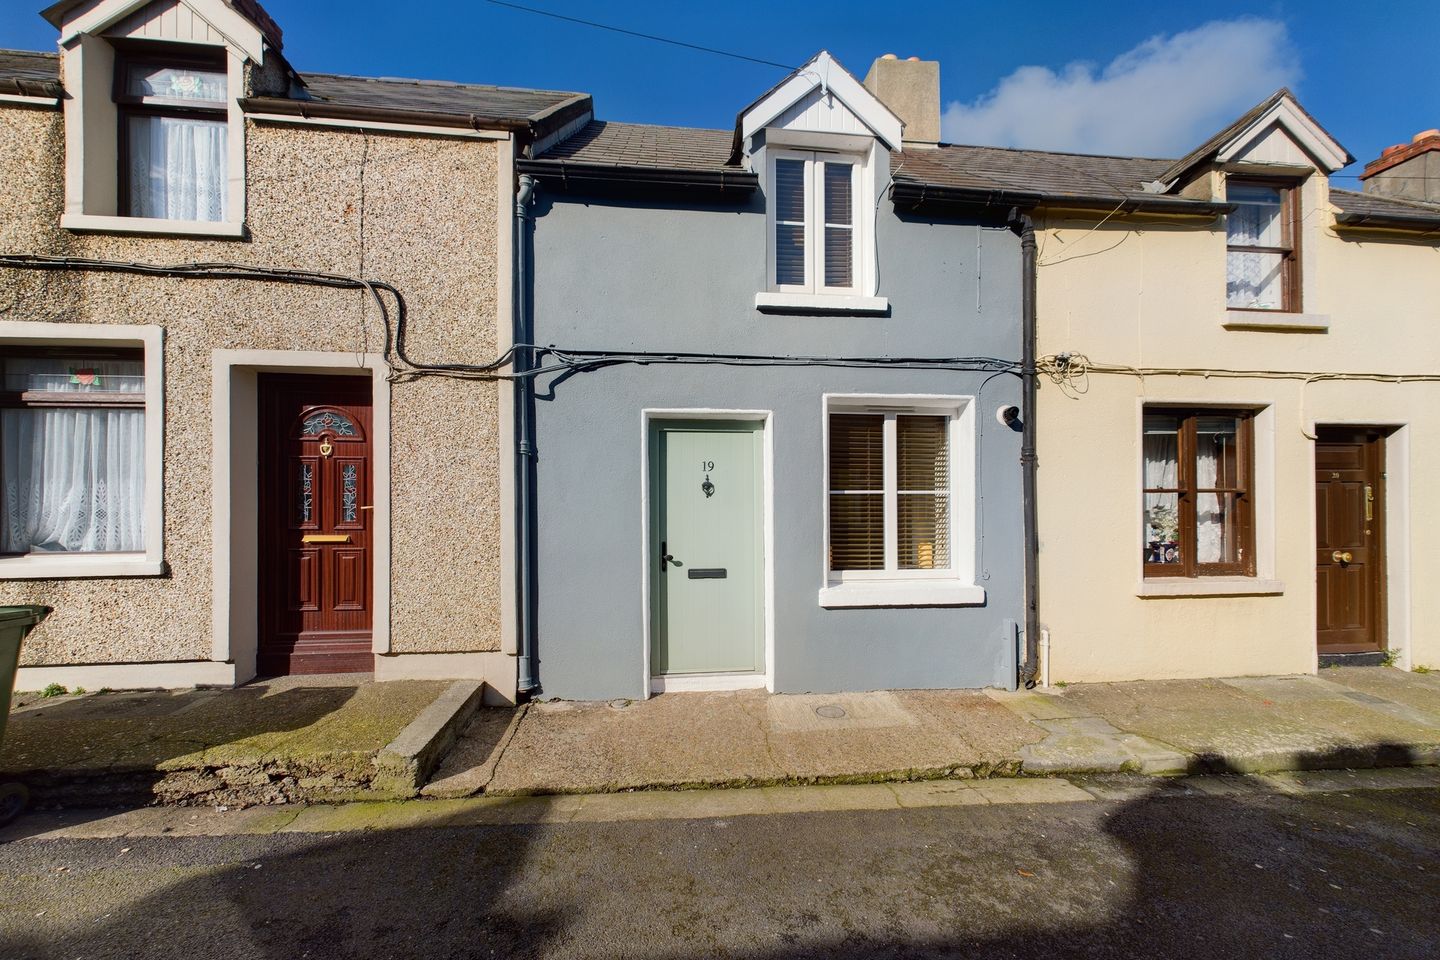 19 Emmet Place, Waterford City, Co. Waterford